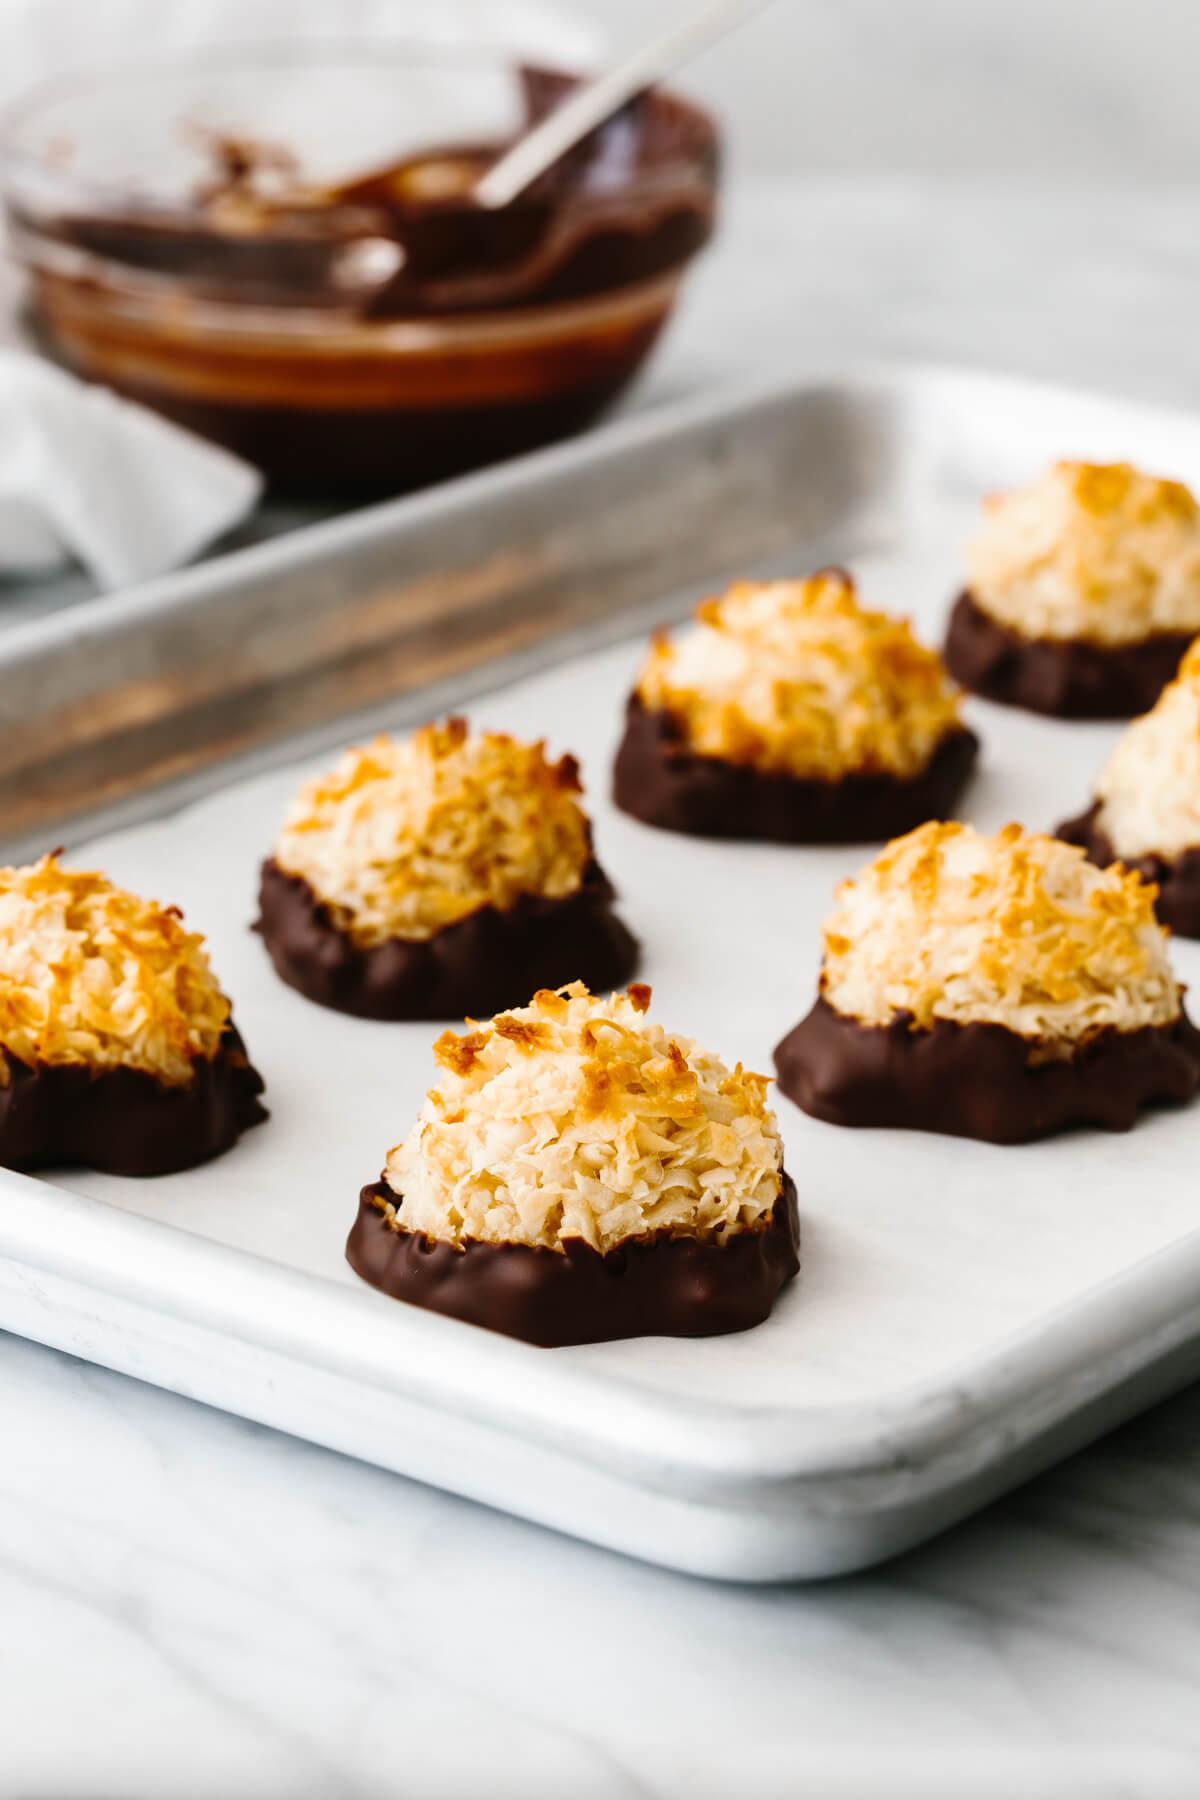 Coconut macaroons on a baking sheet next to a bowl of chocolate.